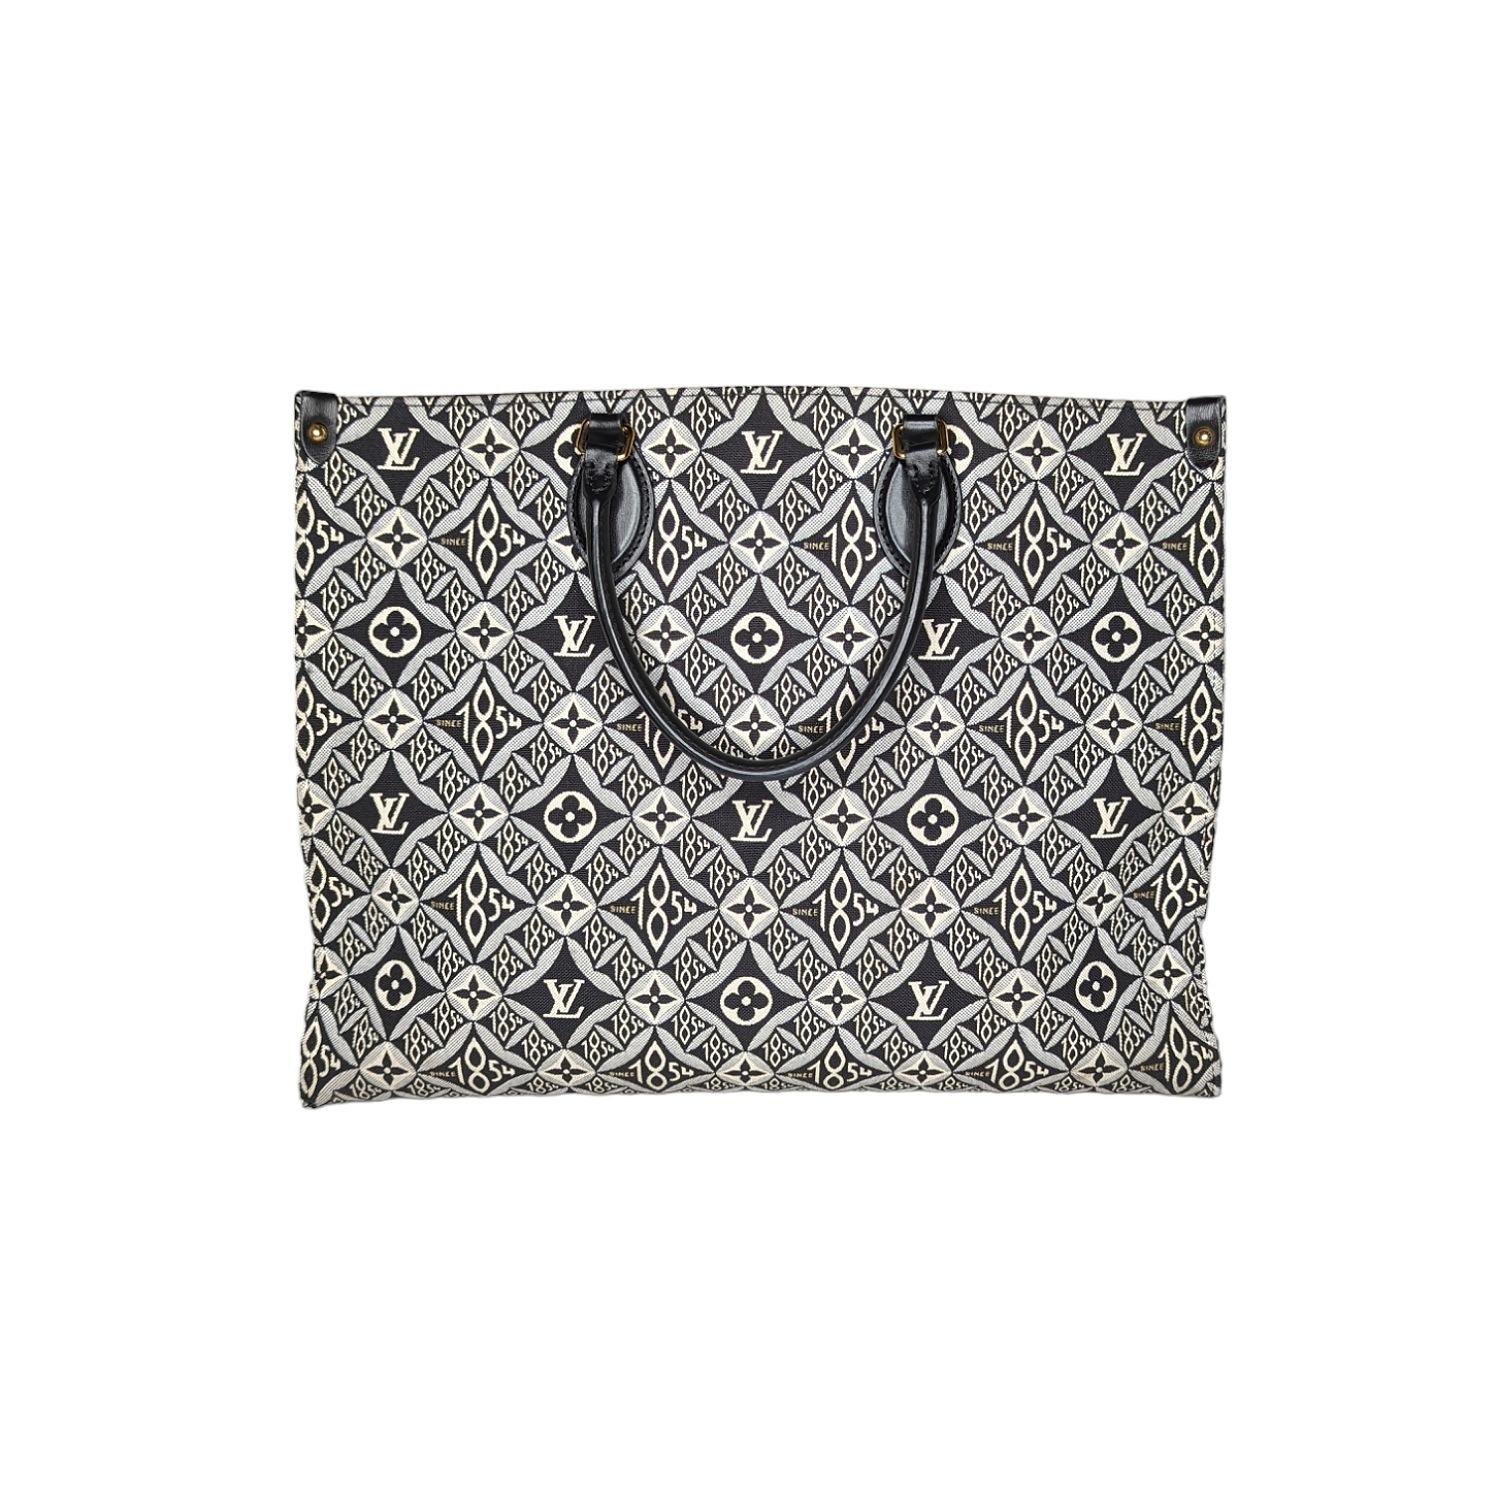 This chic tote is crafted of black, white and Gray Jacquard Since 1854 textile. The shoulder bag features black rolled leather top handles, black cowhide leather shoulder straps, and brass hardware. The top opens to a black microfiber interior with